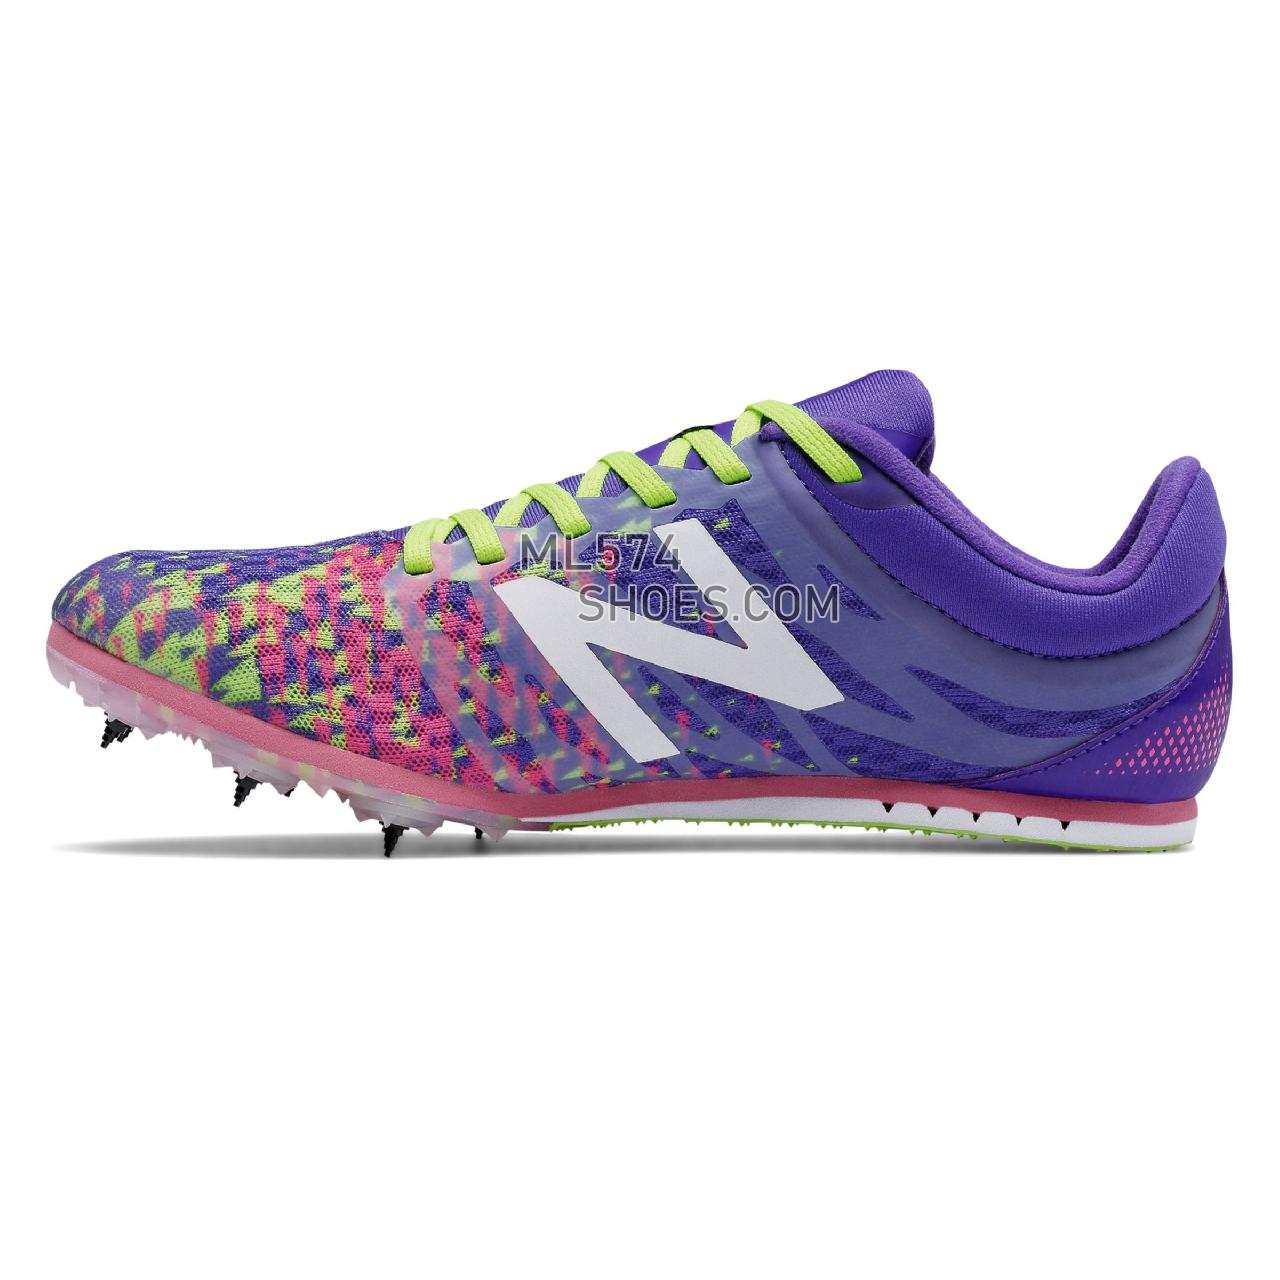 New Balance MD500v5 Spike - Women's Md500V5 Spike - Running - Purple with Firefly and Guava - WMD500P5